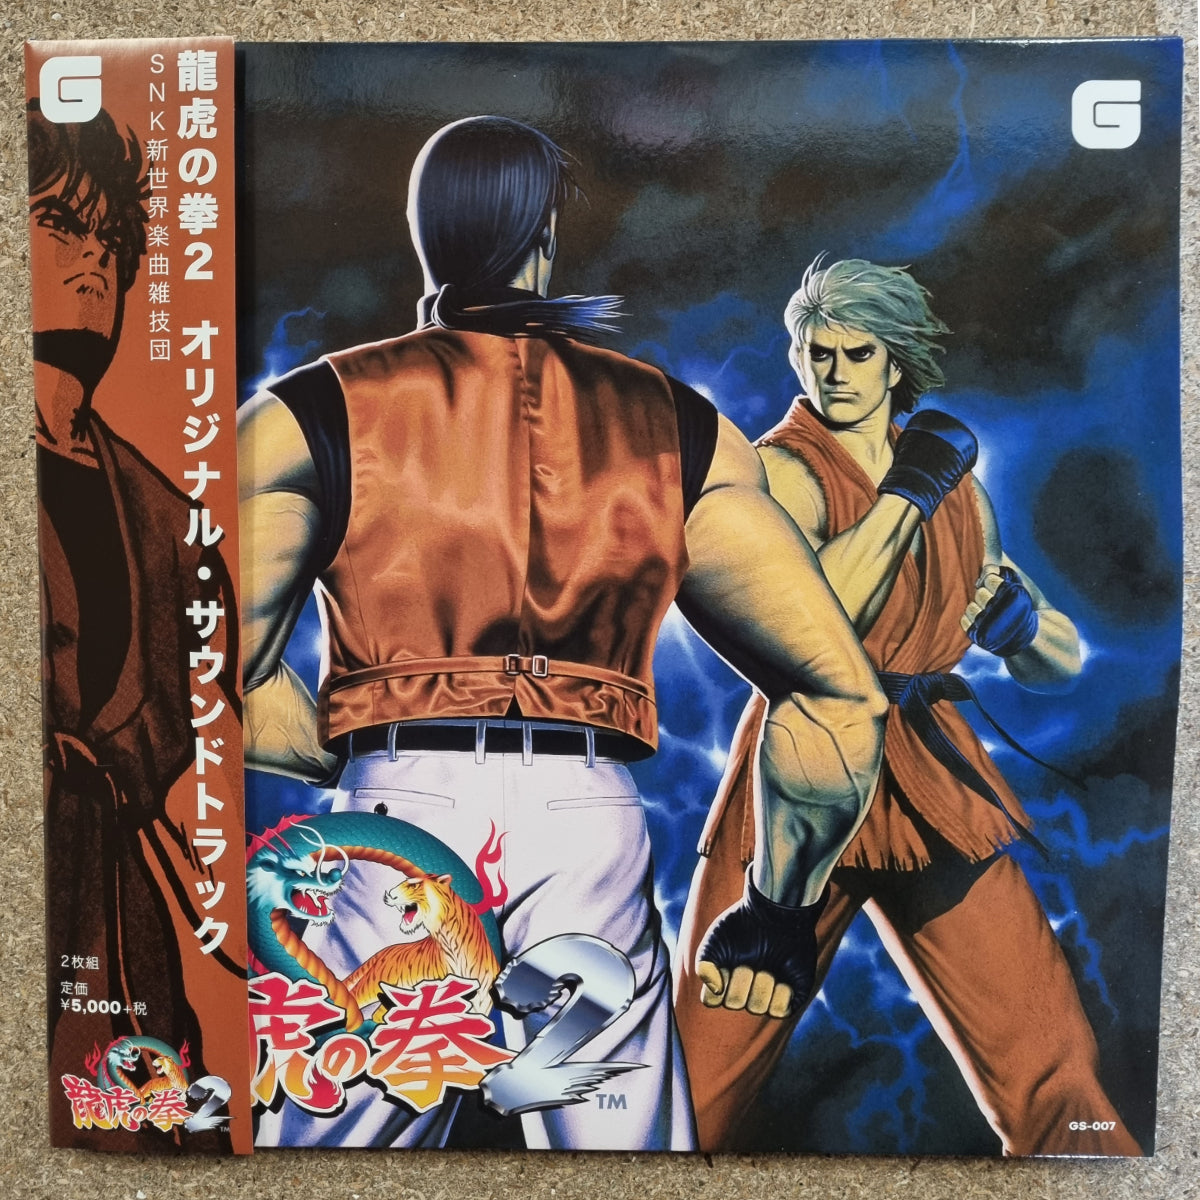 ART OF FIGHTING 2 - The Definitive Soundtrack (Limited Japanese Edition)